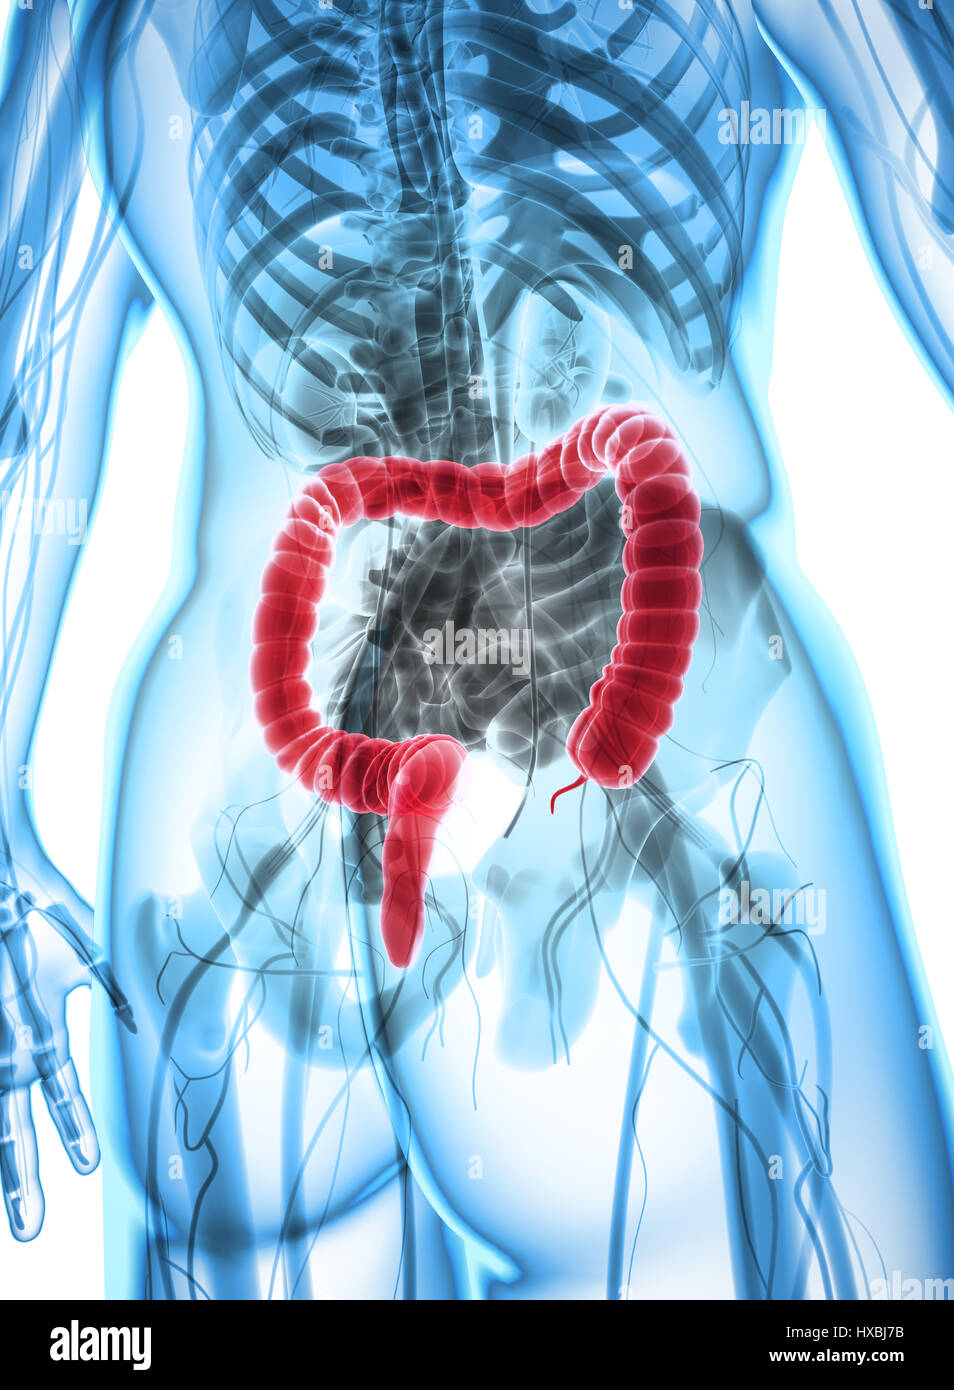 3D illustration of Large Intestine, Part of Digestive System. Stock Photo